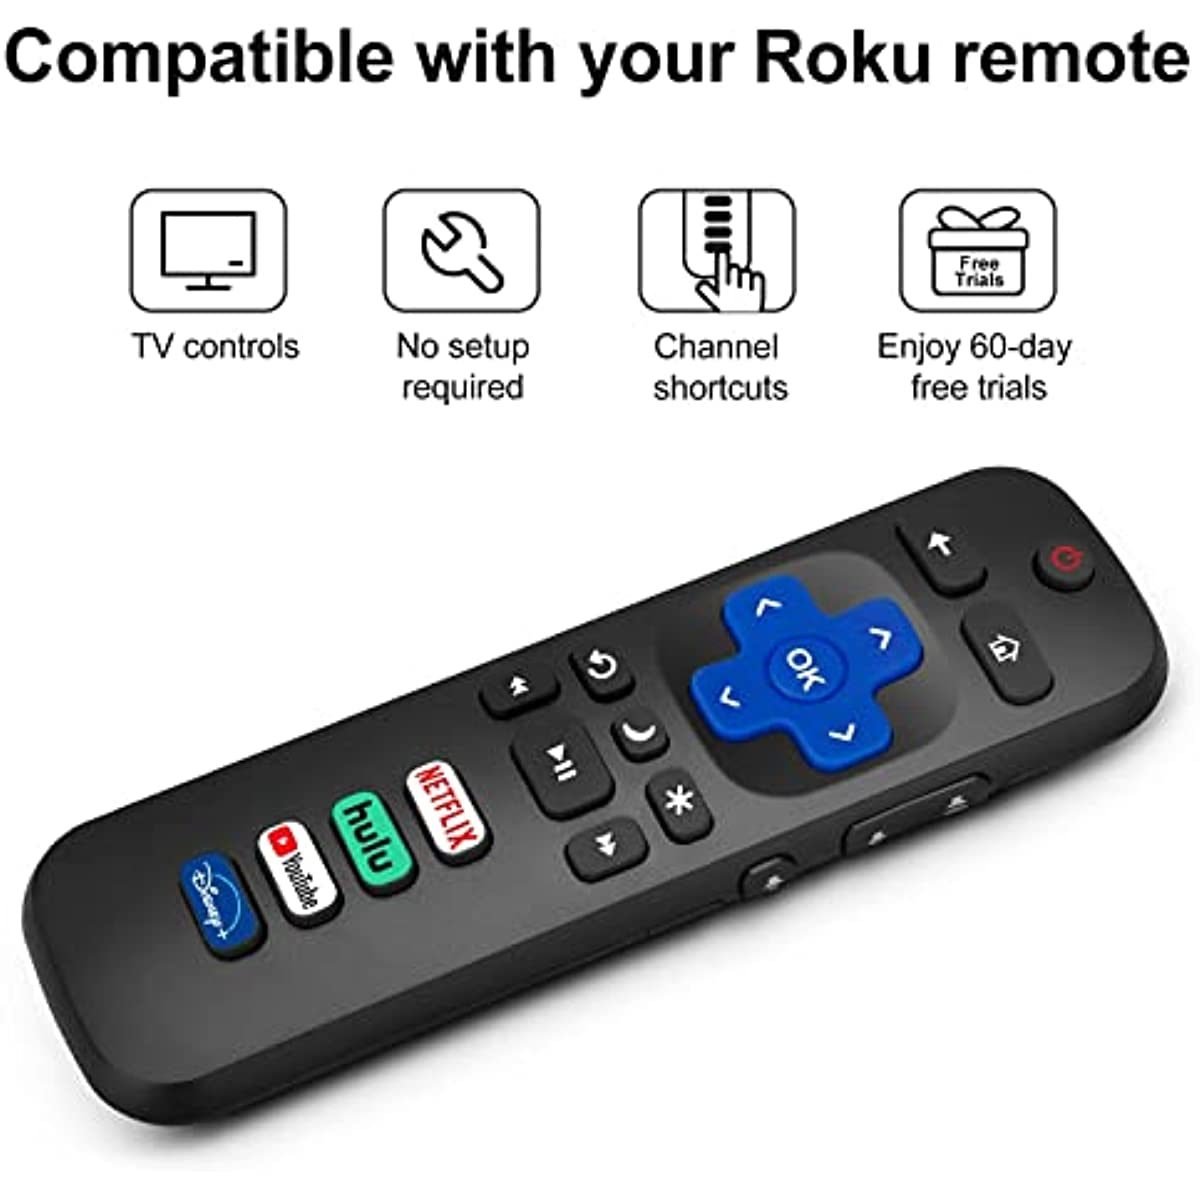 (Pack of 2) Replaced Remote Control Only for Roku TV; Compatible for TCL/Hisense/Onn/Sharp/Element/Westinghouse/Philips Roku Series Smart TVs (Not for Roku Stick and Box) Moorescarts